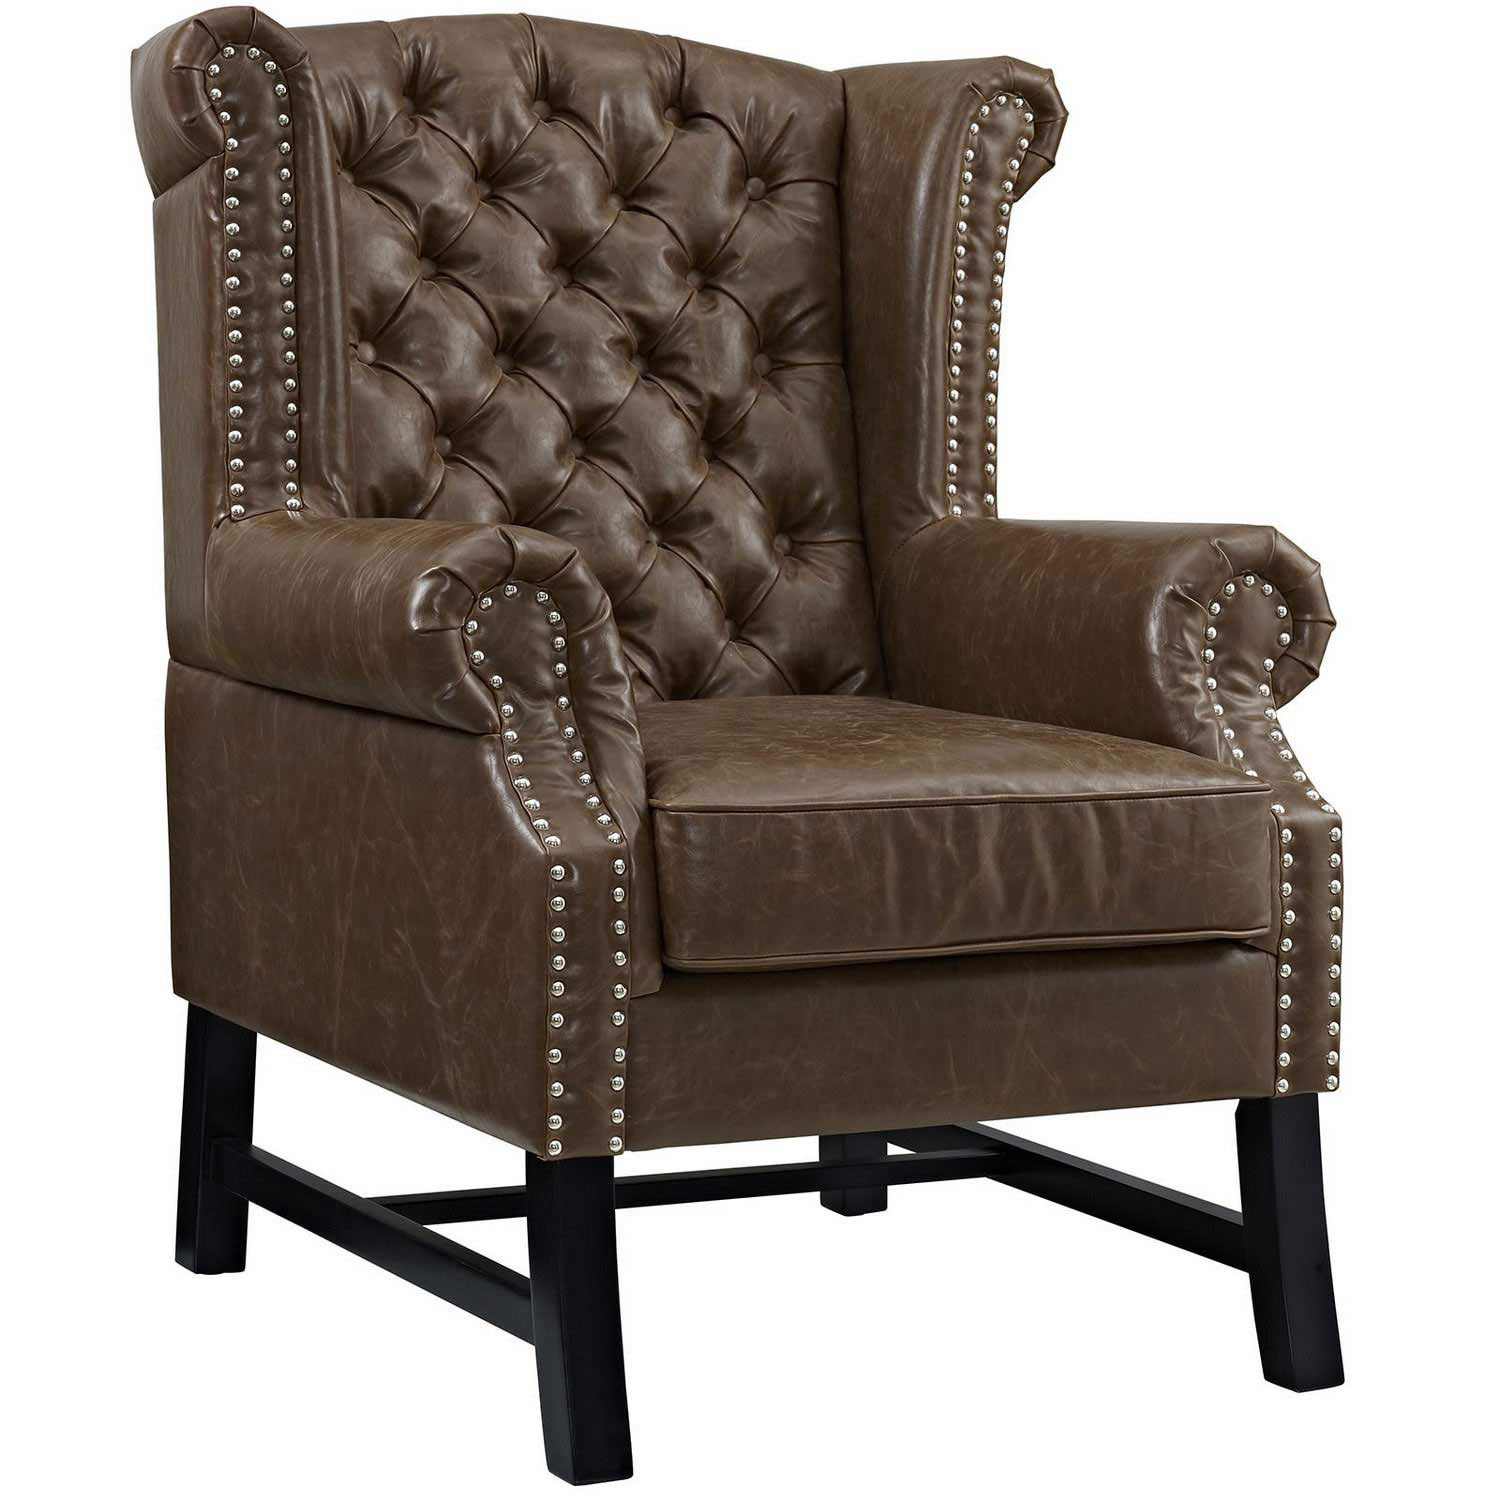 Modway Steer Arm Chair - Brown